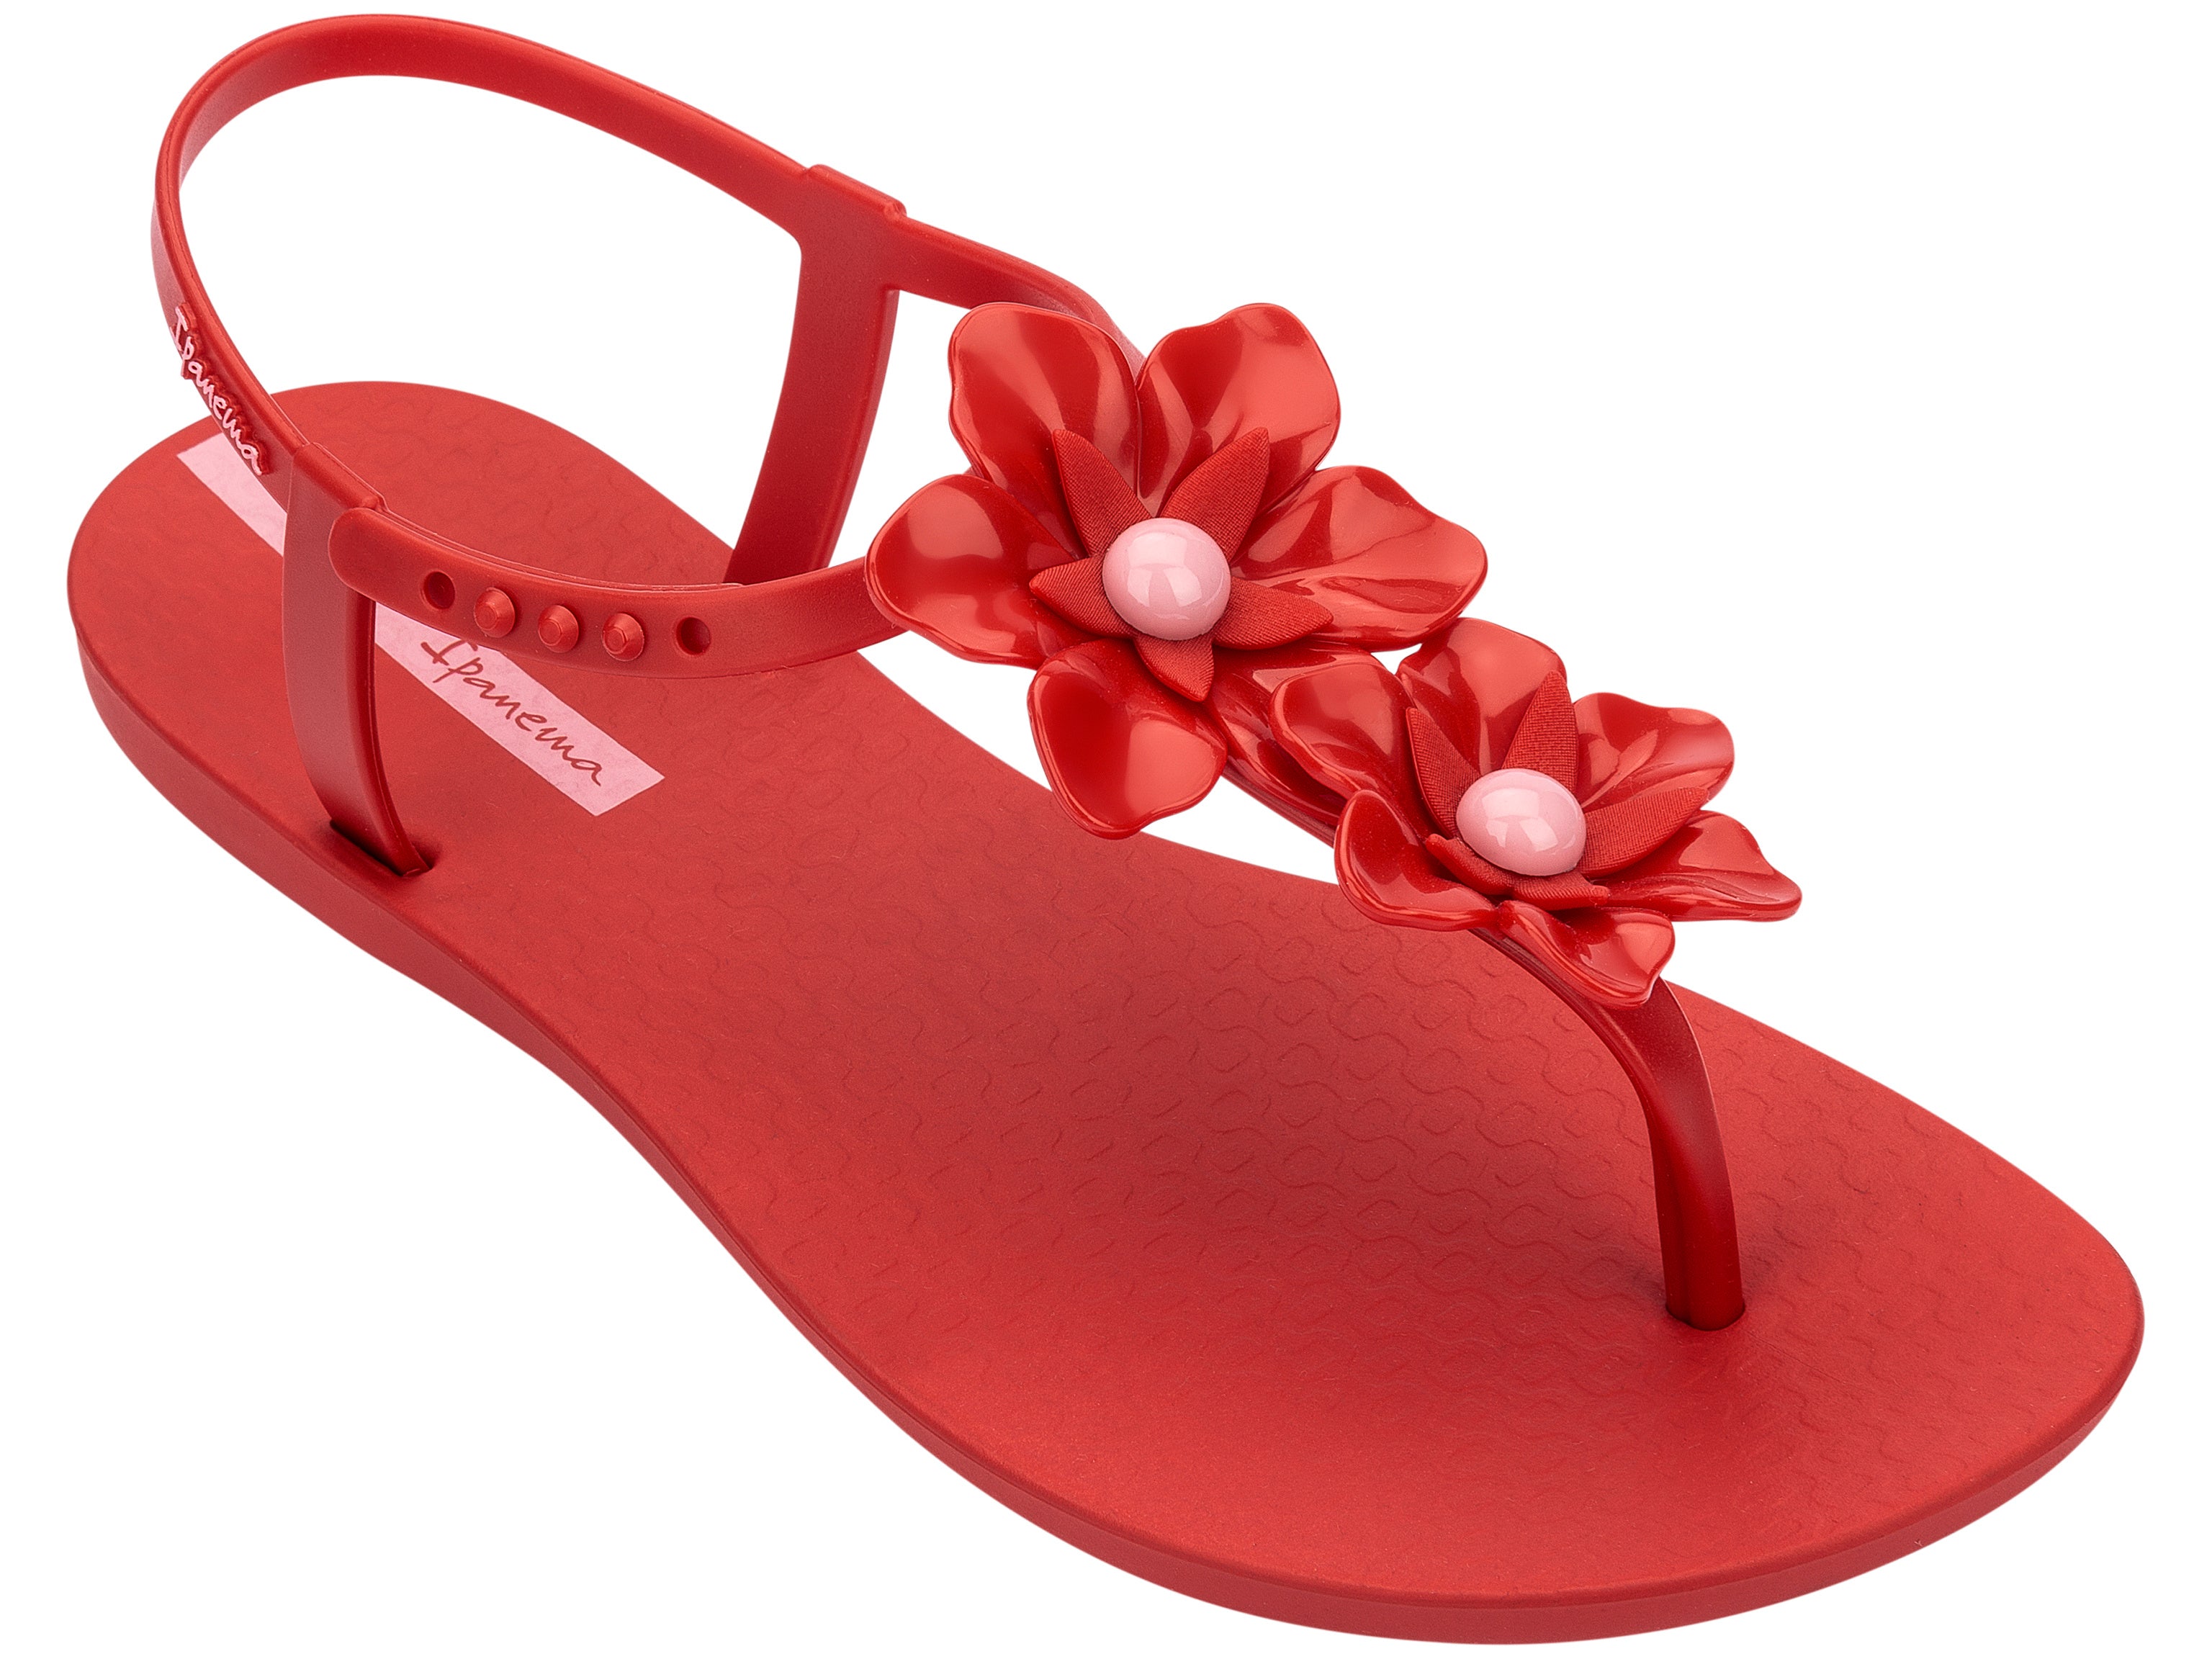 Angled view of a Red Ipanema Duo Flowers women's t-strap sandal with two flowers.